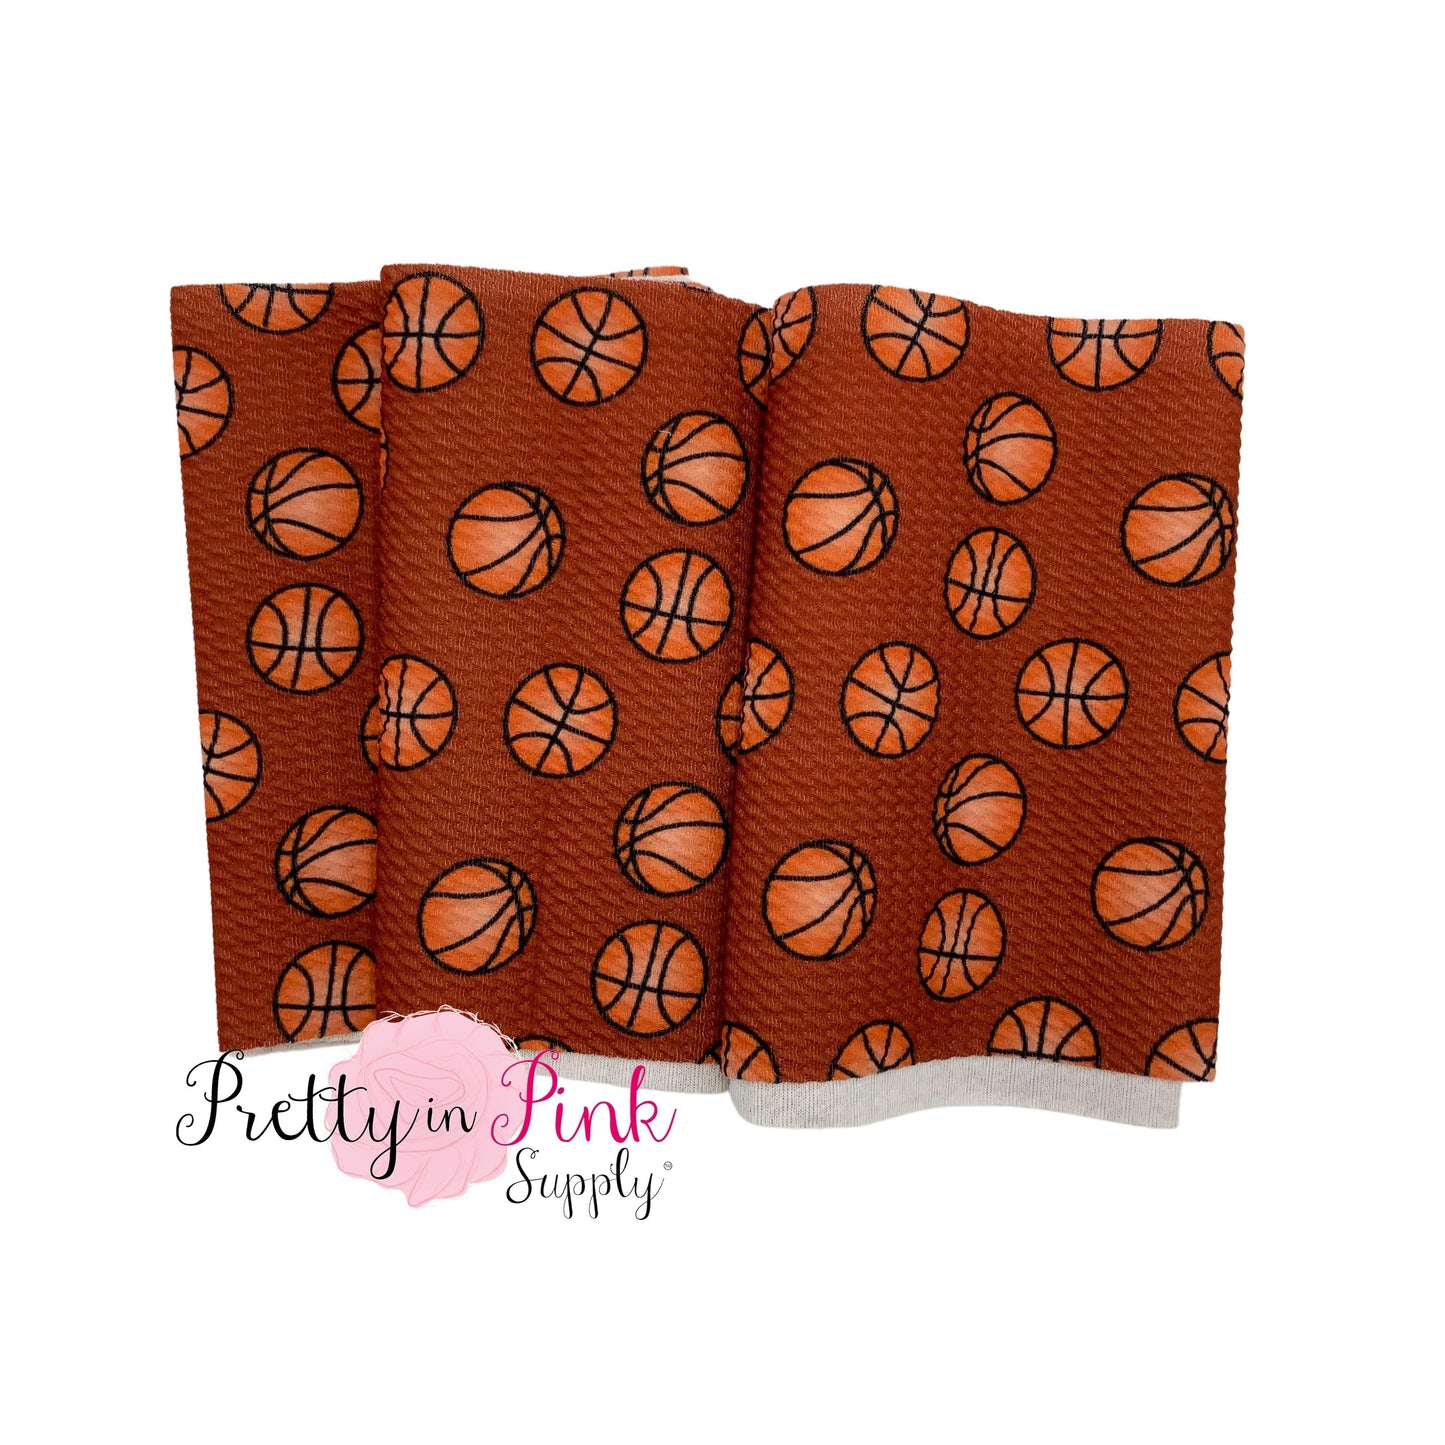 Folded brown liverpool fabric strip with basketballs.